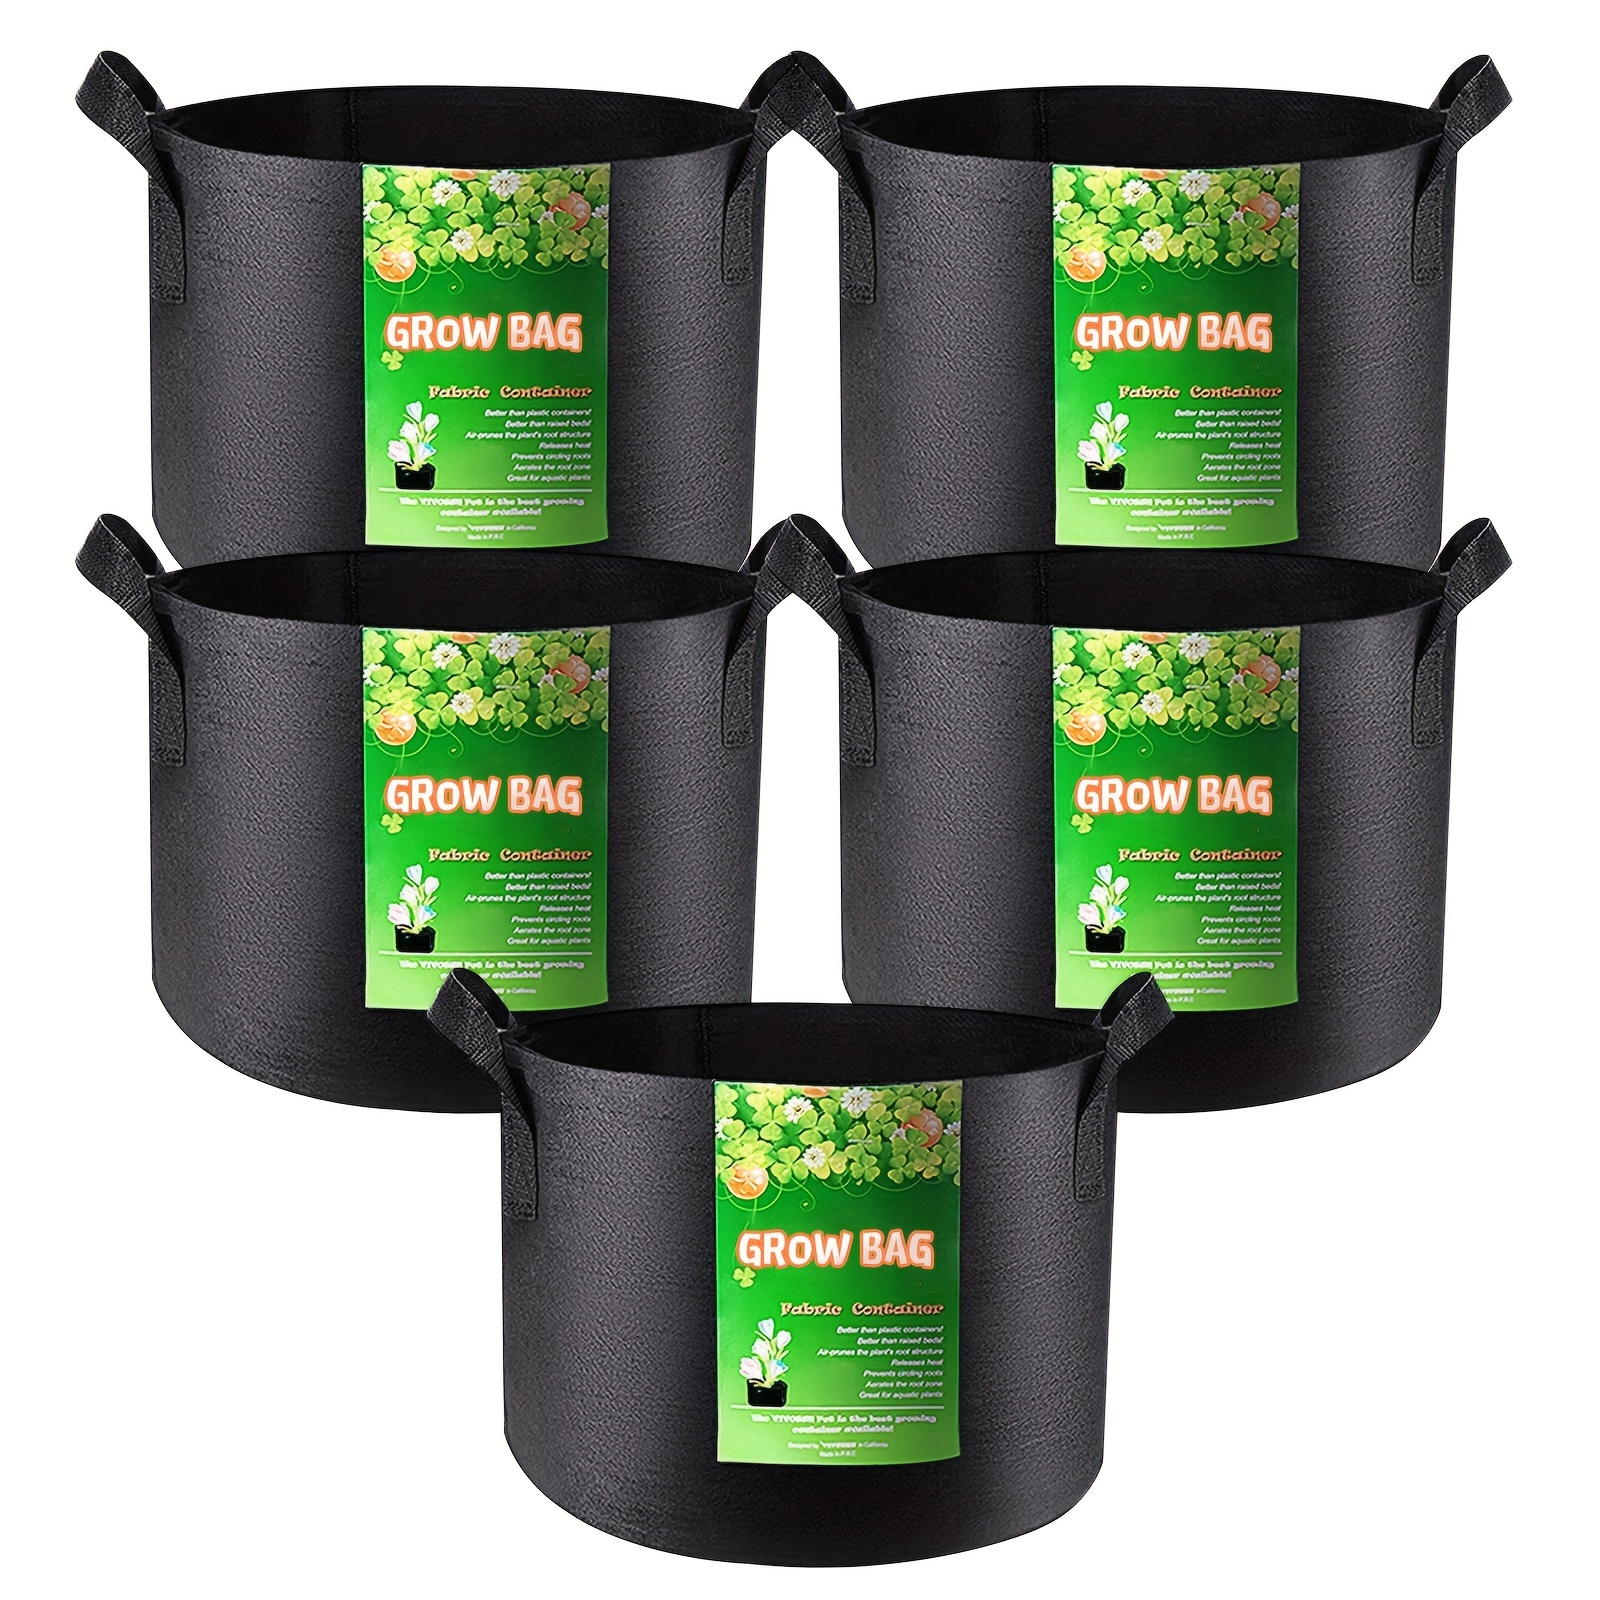 VIVOSUN 5 Pack 10 Gallon Square Grow Bags, Thick Fabric Bags with Handles 